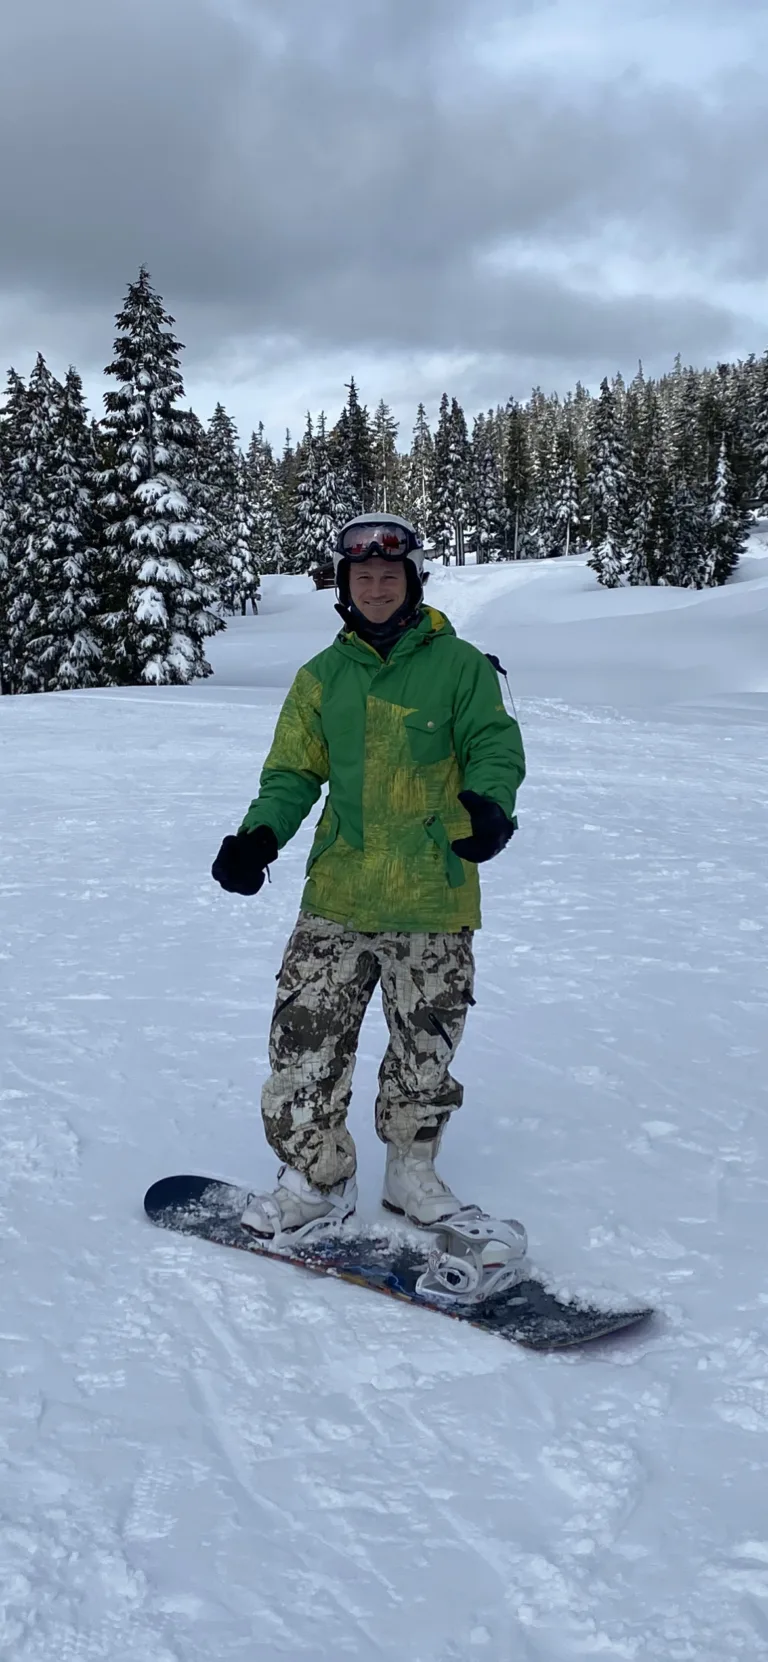 Vancouver Island recovery, snowboarding